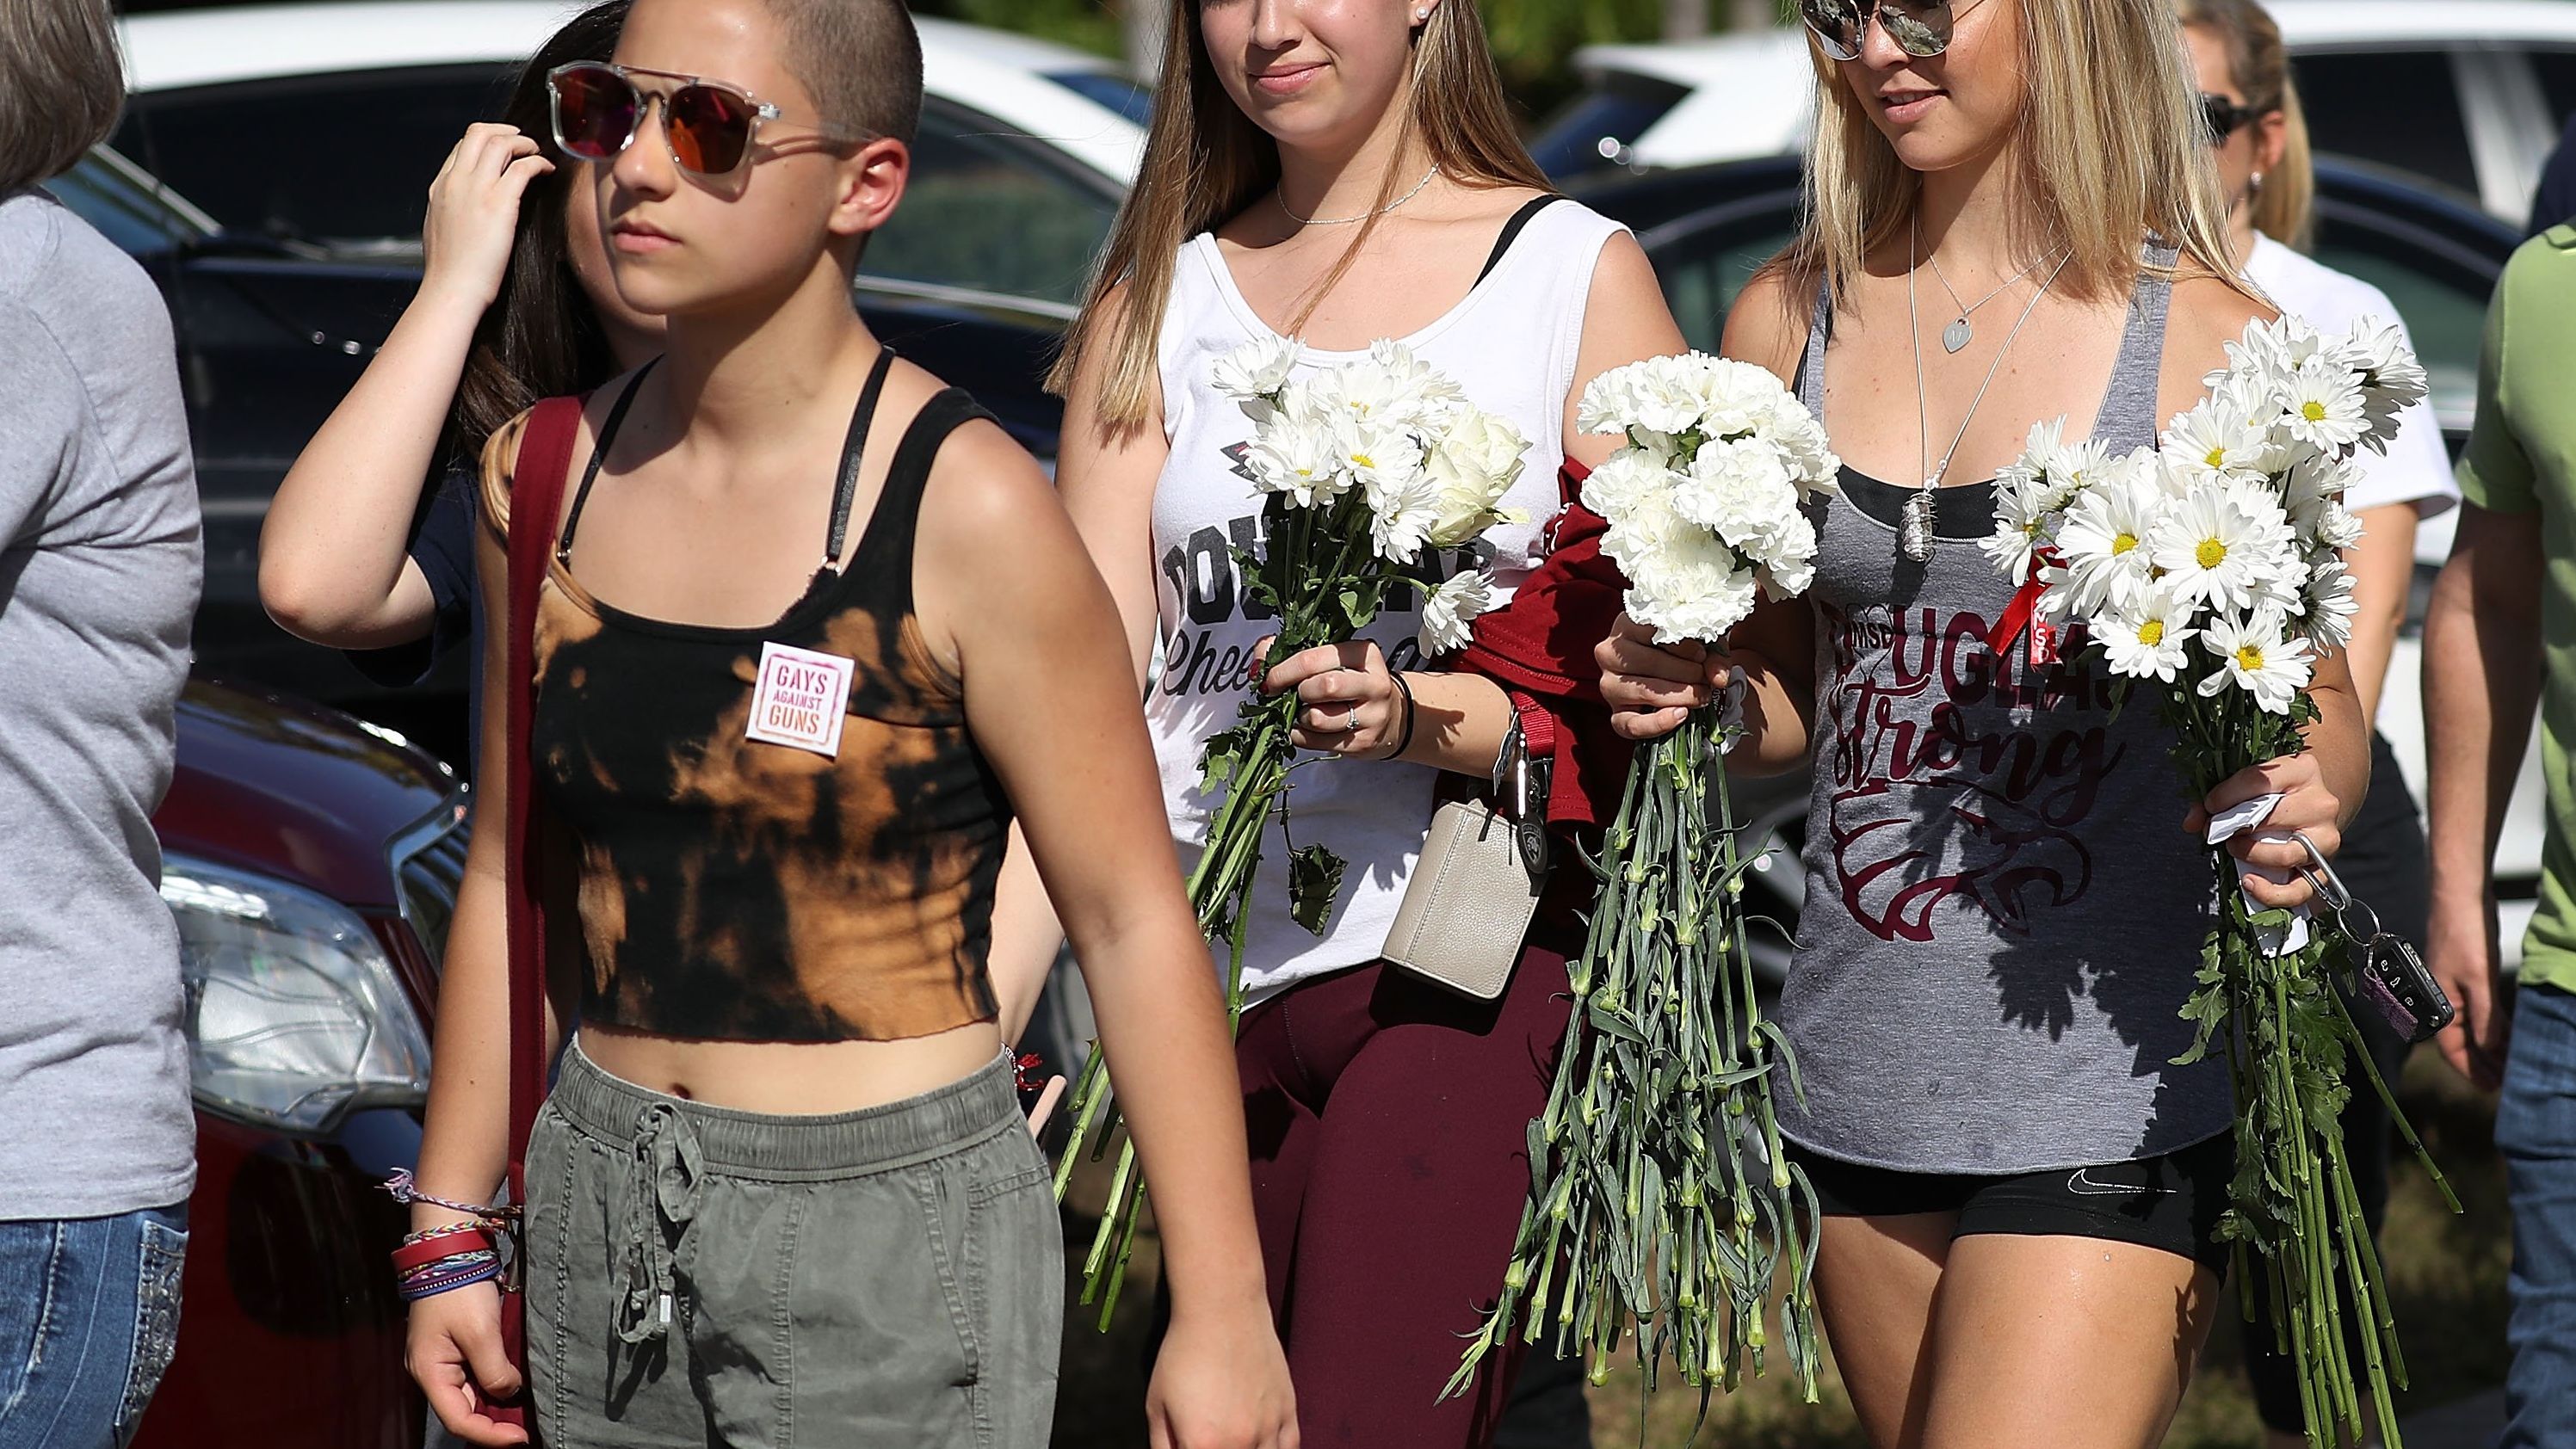 Students at Marjory Stoneman Douglas High School returned to campus on Feb. 25 for the first time since the shooting that killed 17 people on Feb. 14.